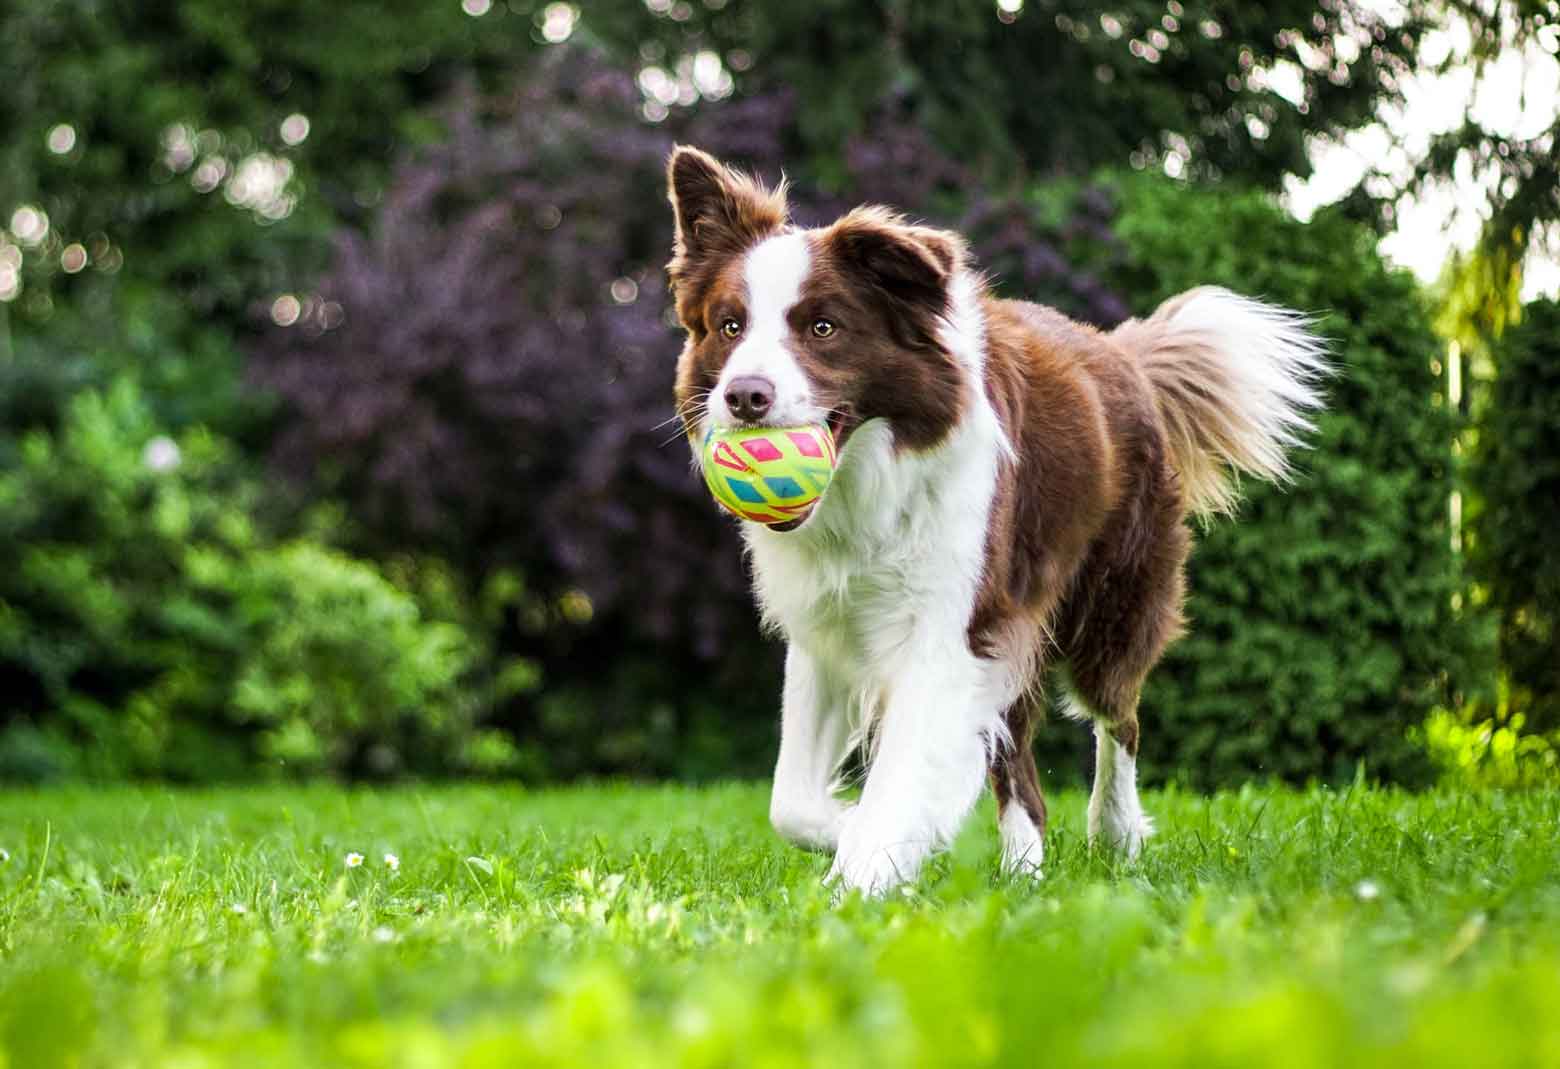 Dog With Ball In His Mouth Running Through Grass